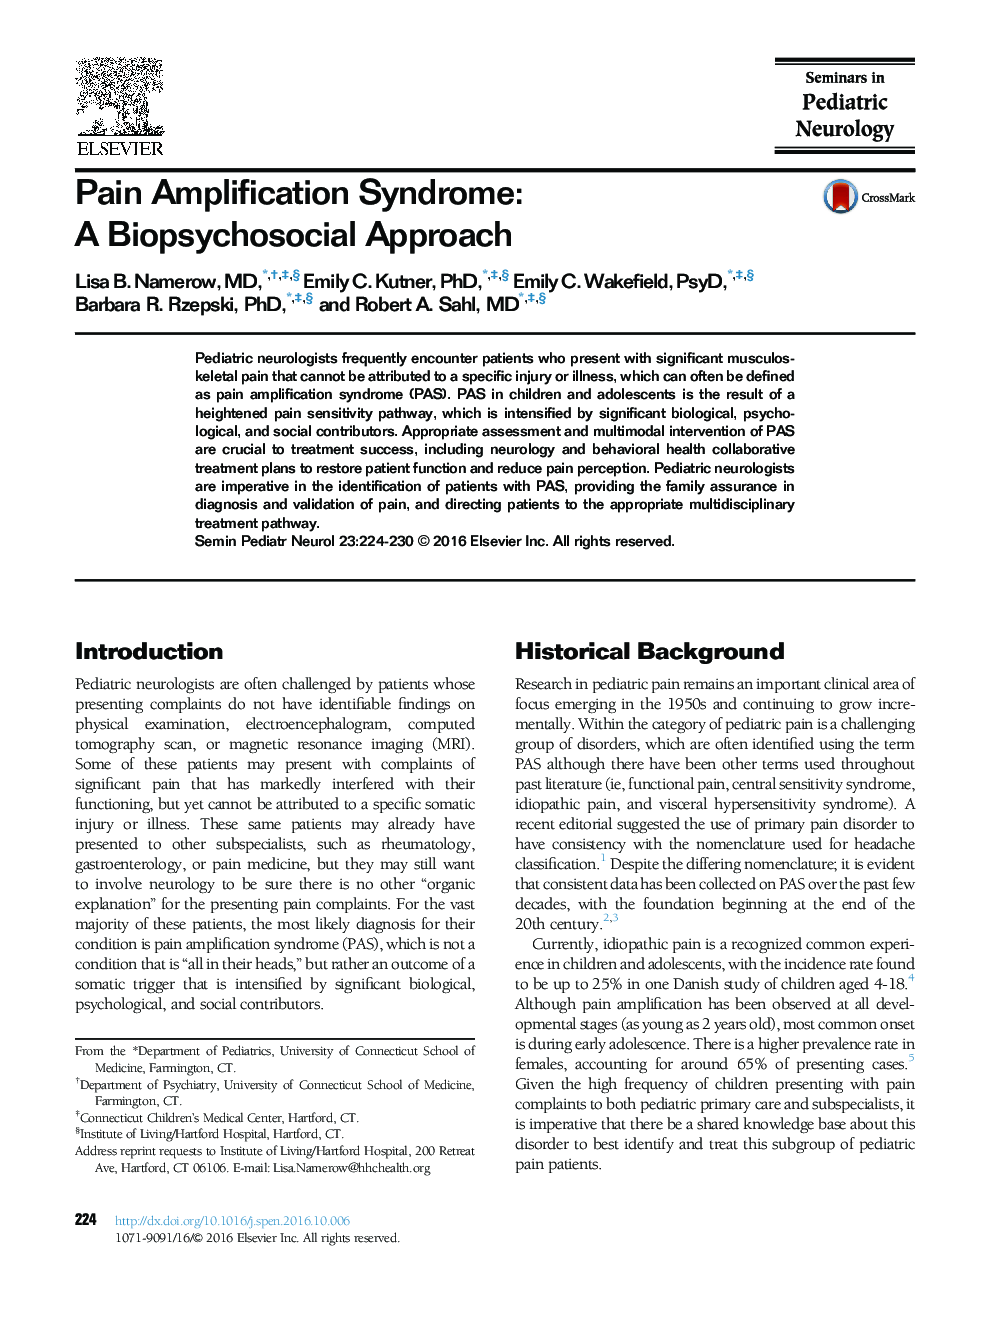 Pain Amplification Syndrome: A Biopsychosocial Approach